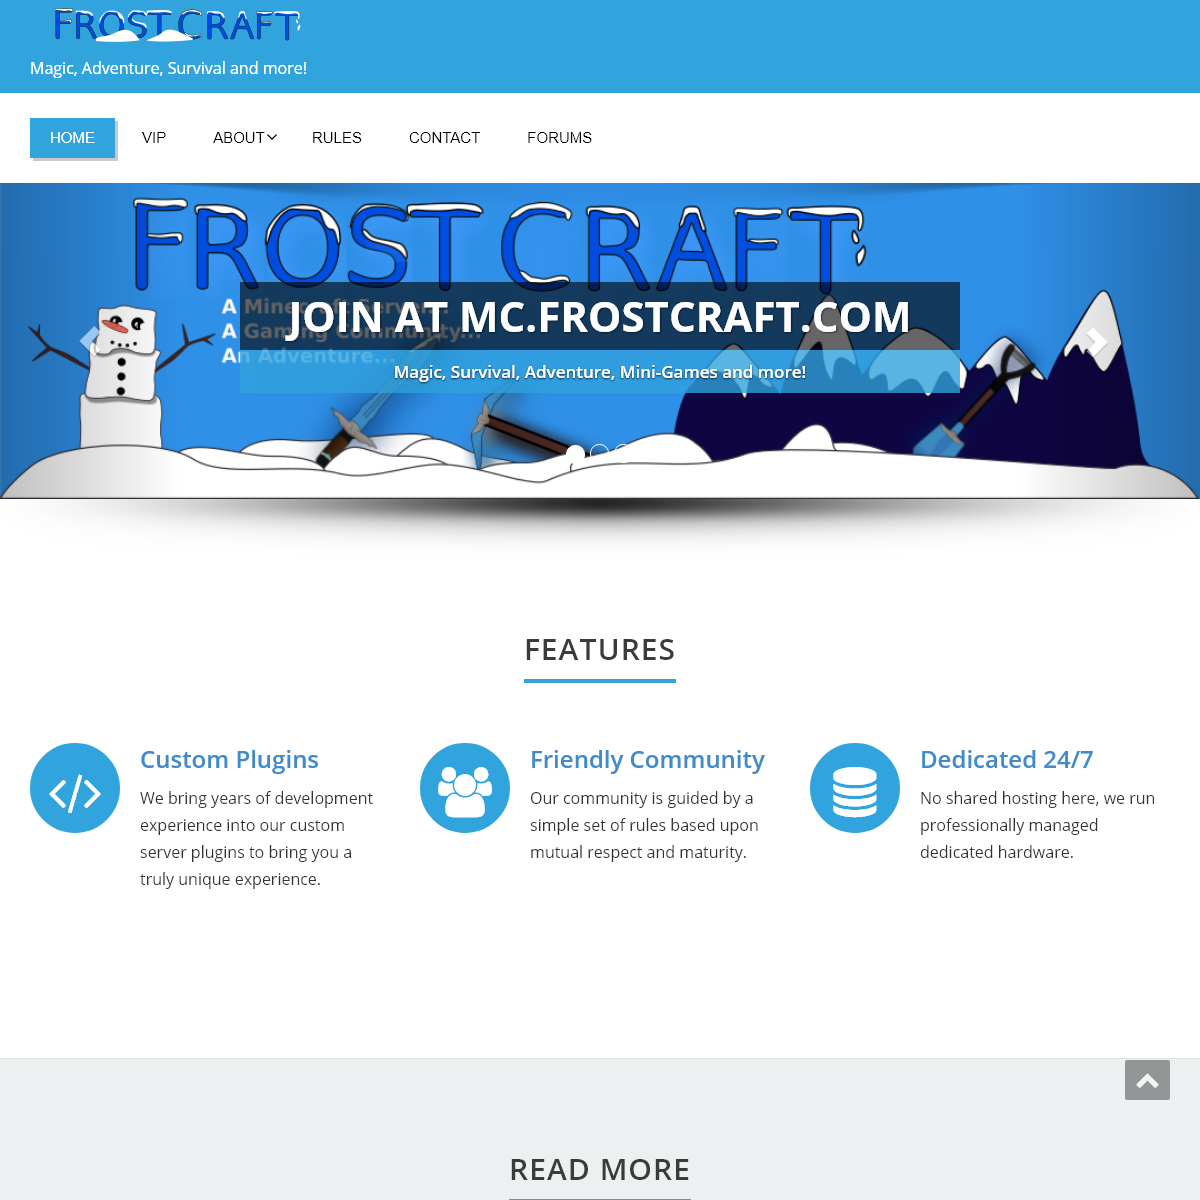 A complete backup of frostcraft.com